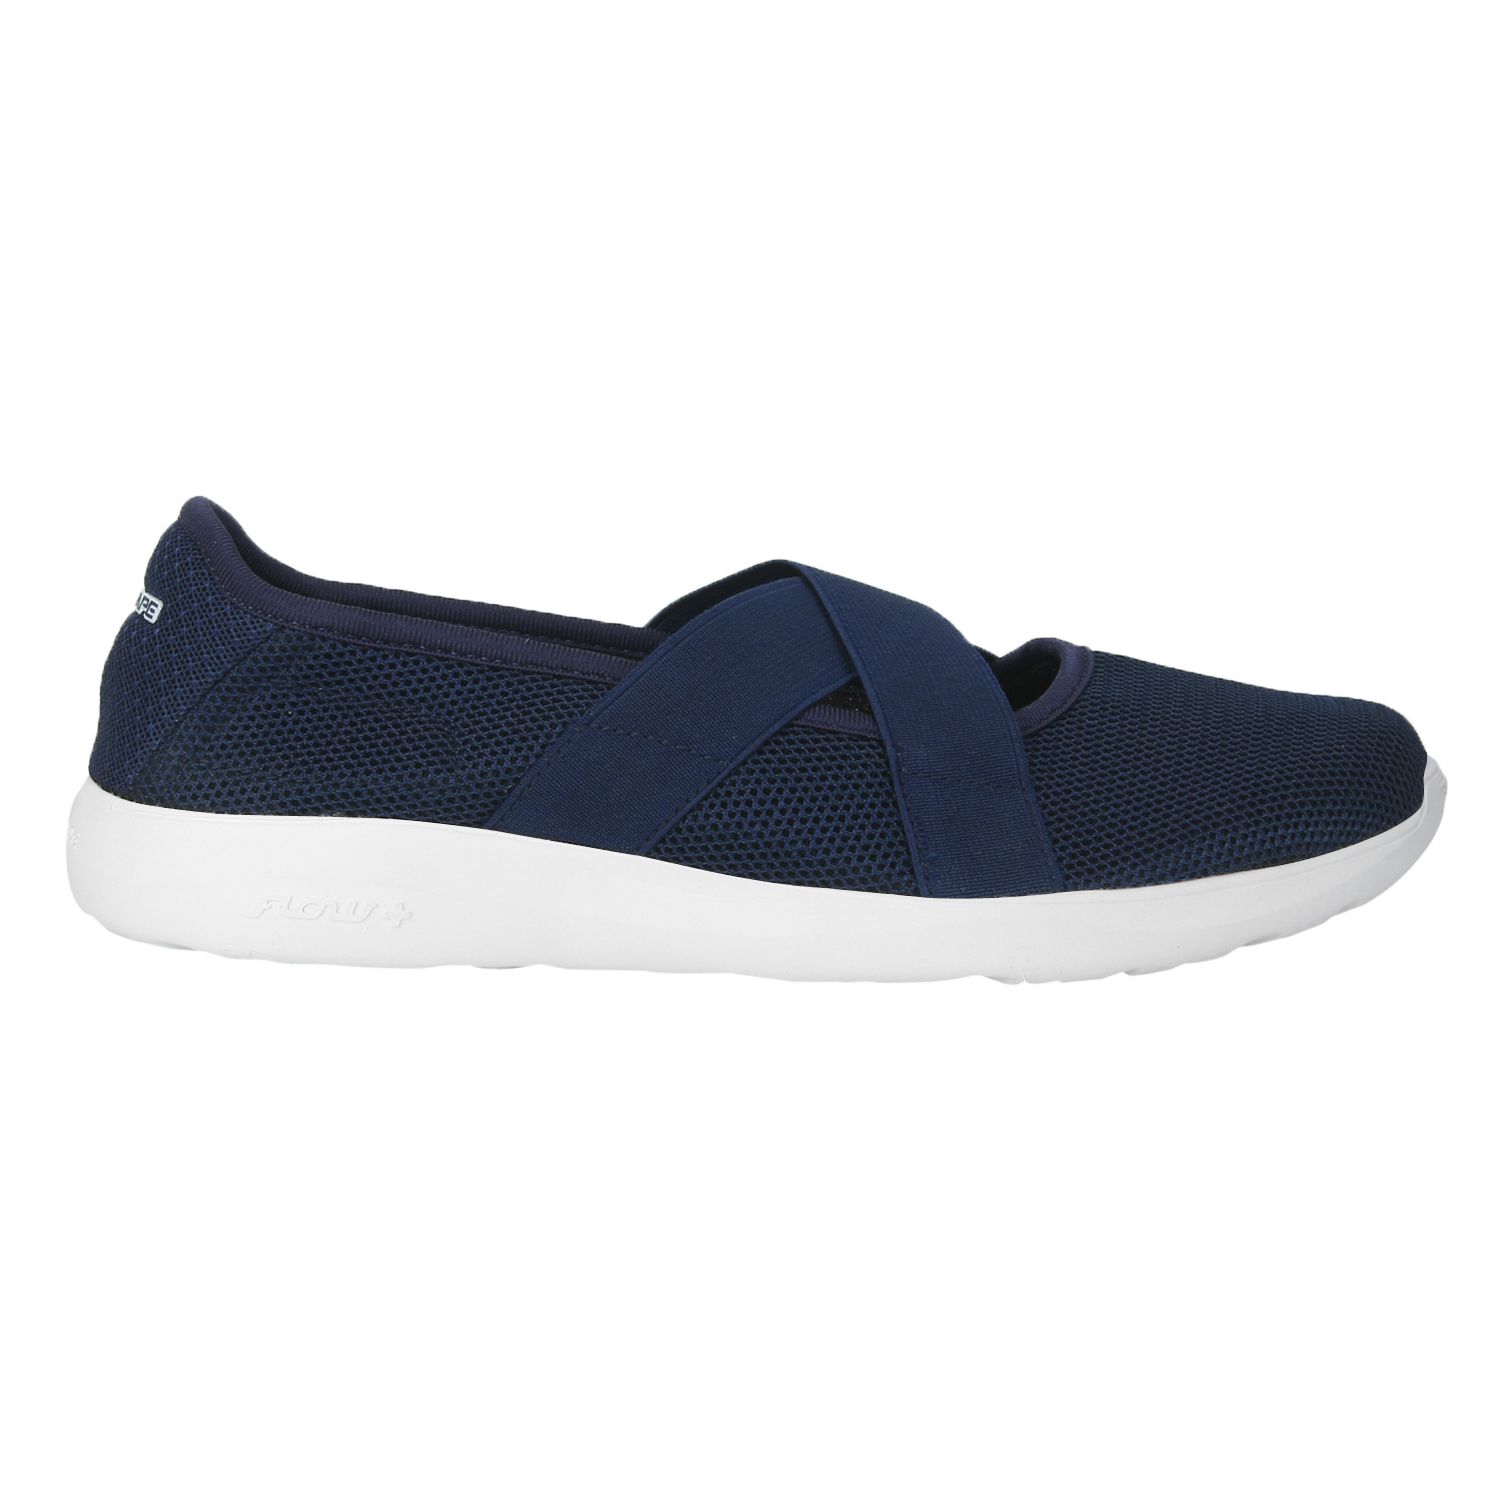 Red Tape Navy Walking Shoes Price in India- Buy Red Tape Navy Walking ...